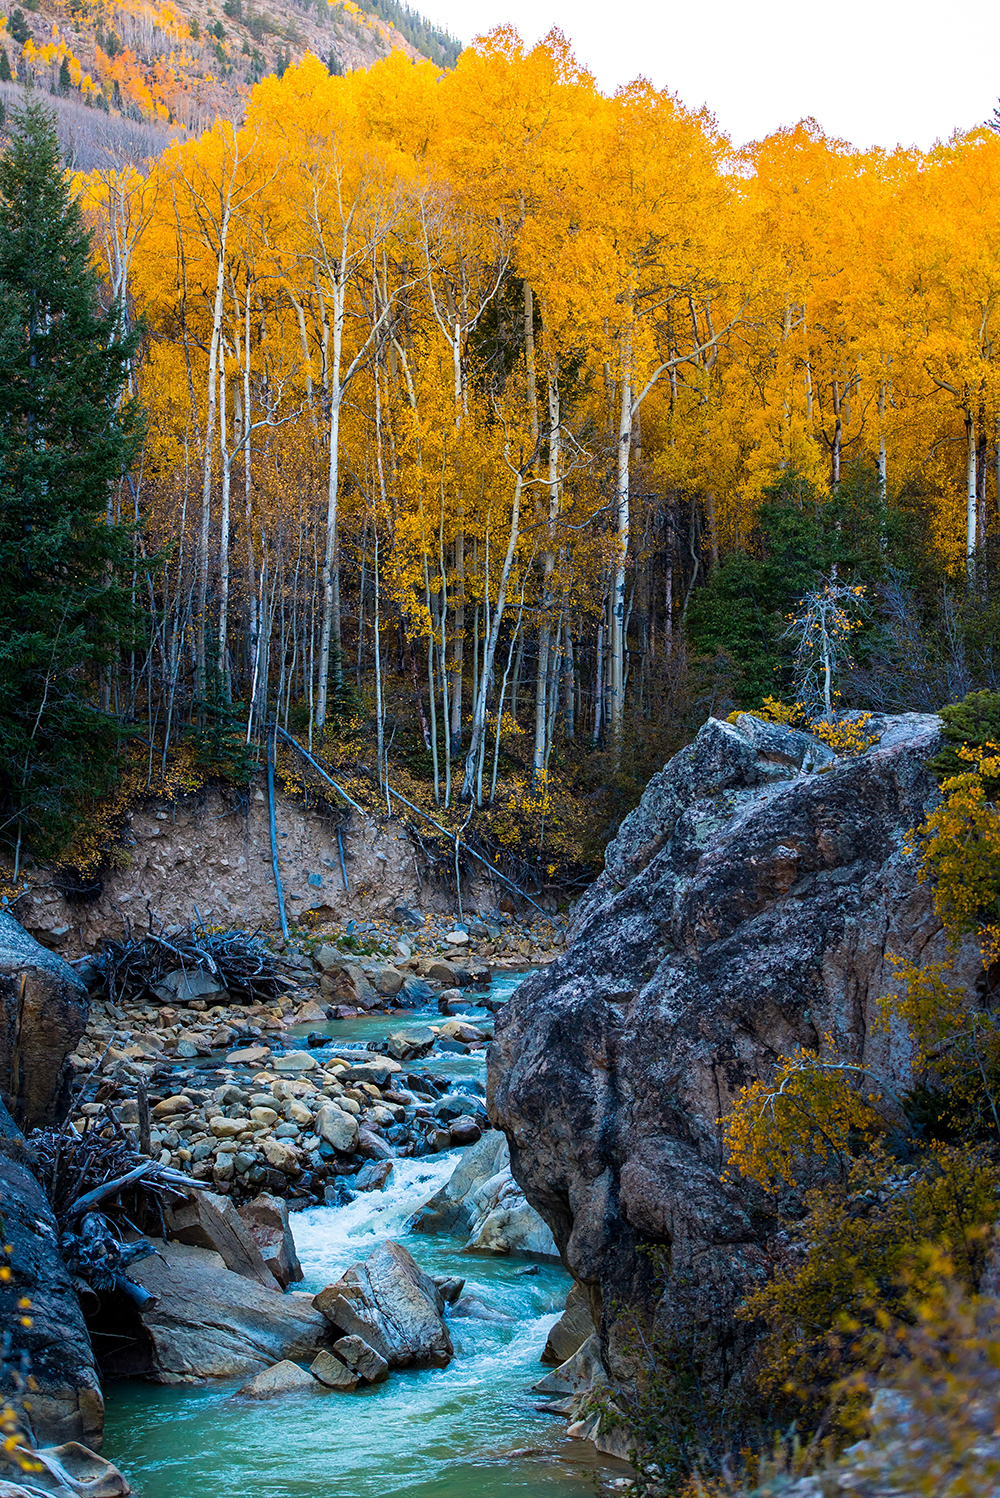 A stream surrounded by rocks and trees with orange leaves | Motif